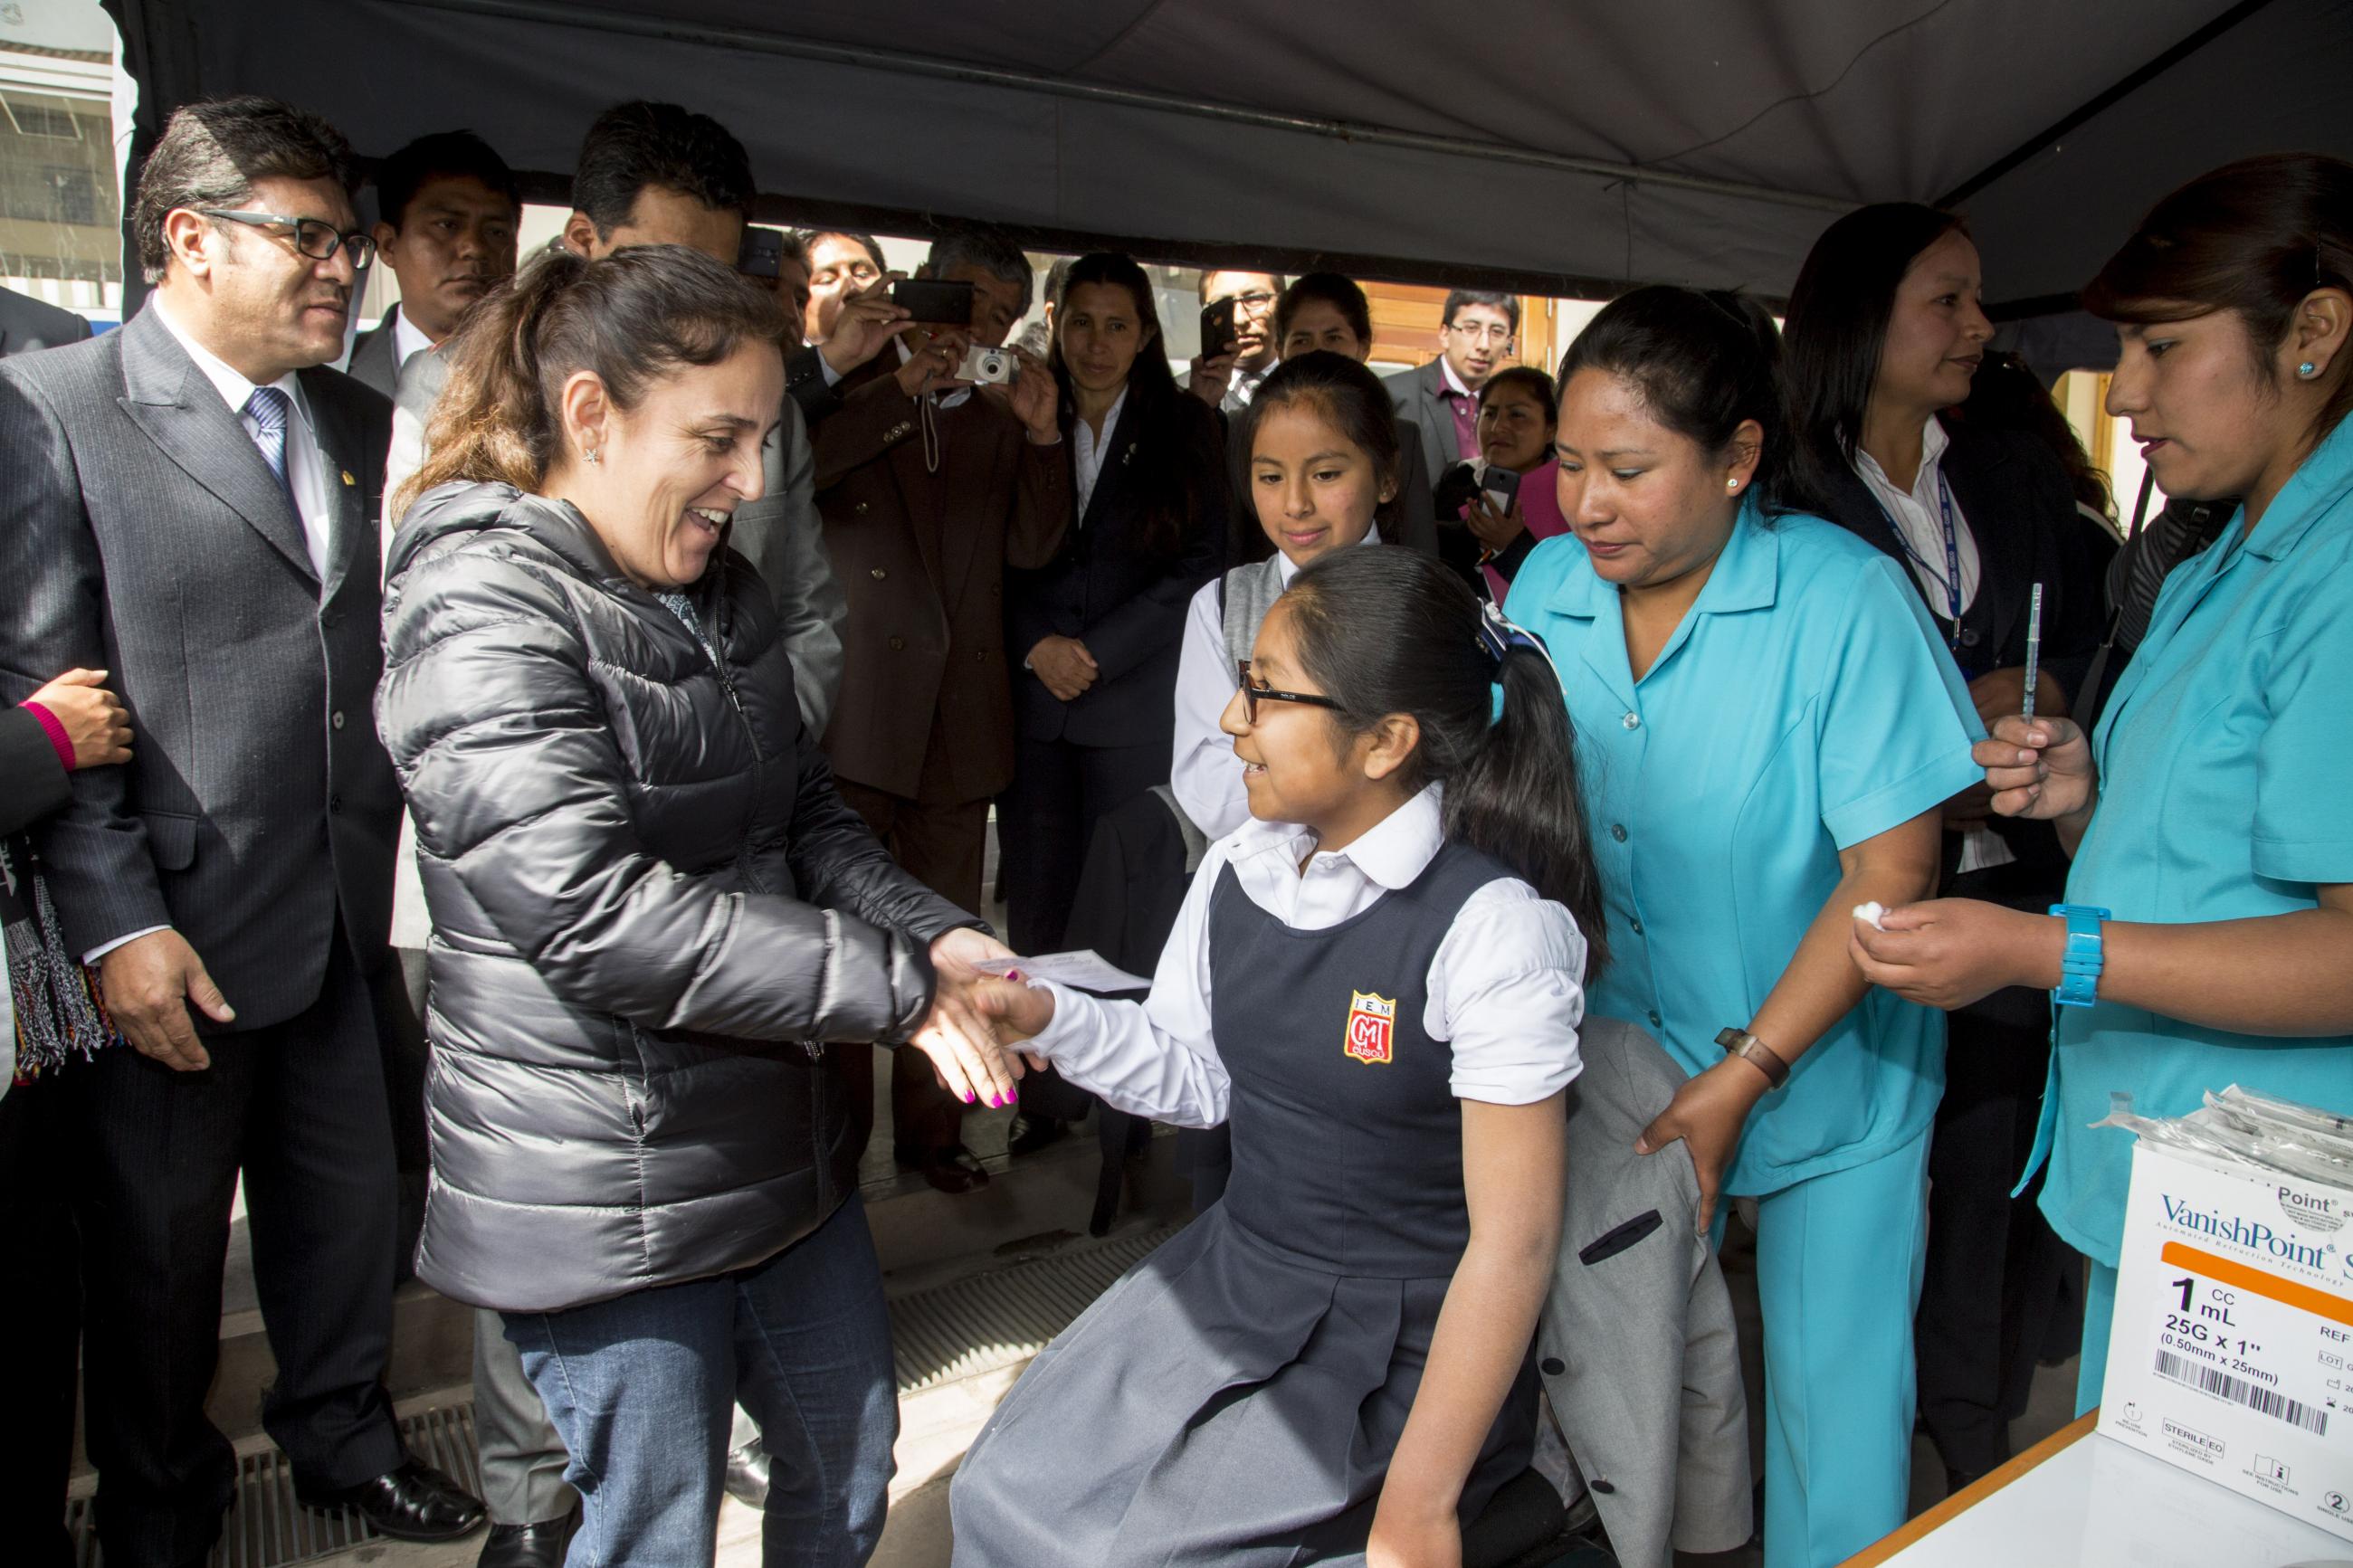 While Minister of Health in Peru, Dr. Patricia García promoted HPV vaccination in Cusco, Peru.